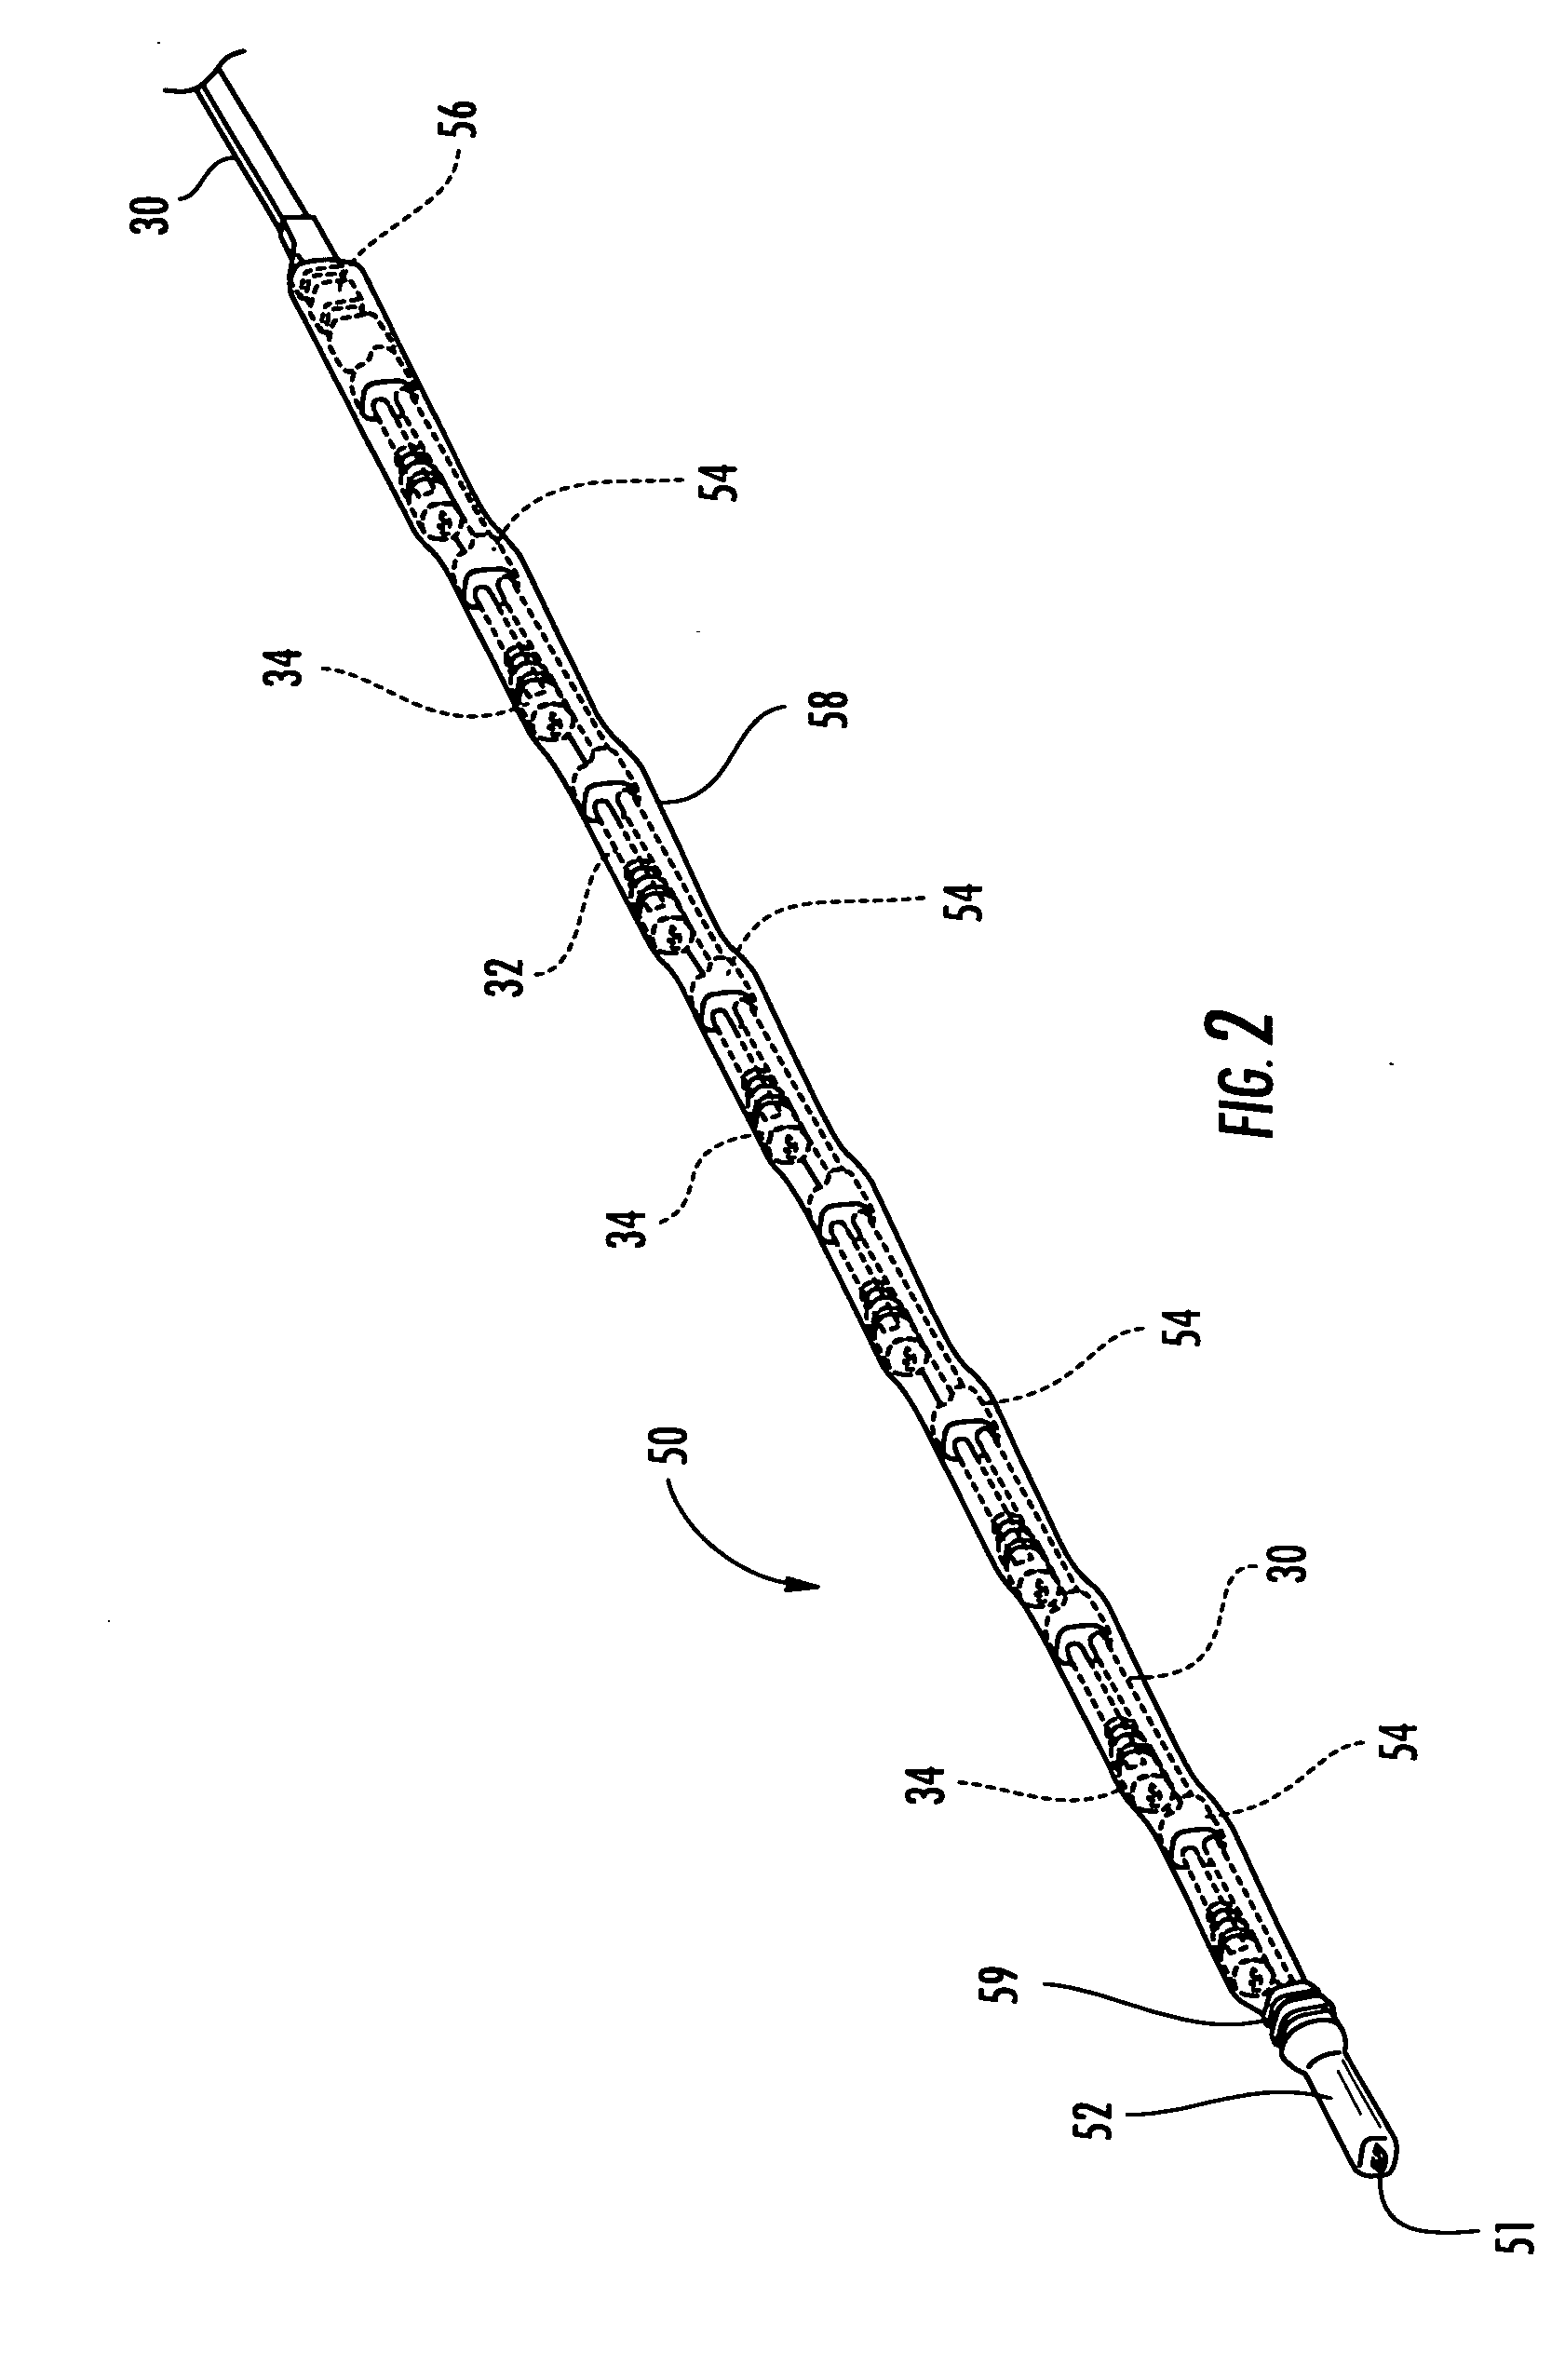 Preconnectorized fiber optic cable assembly